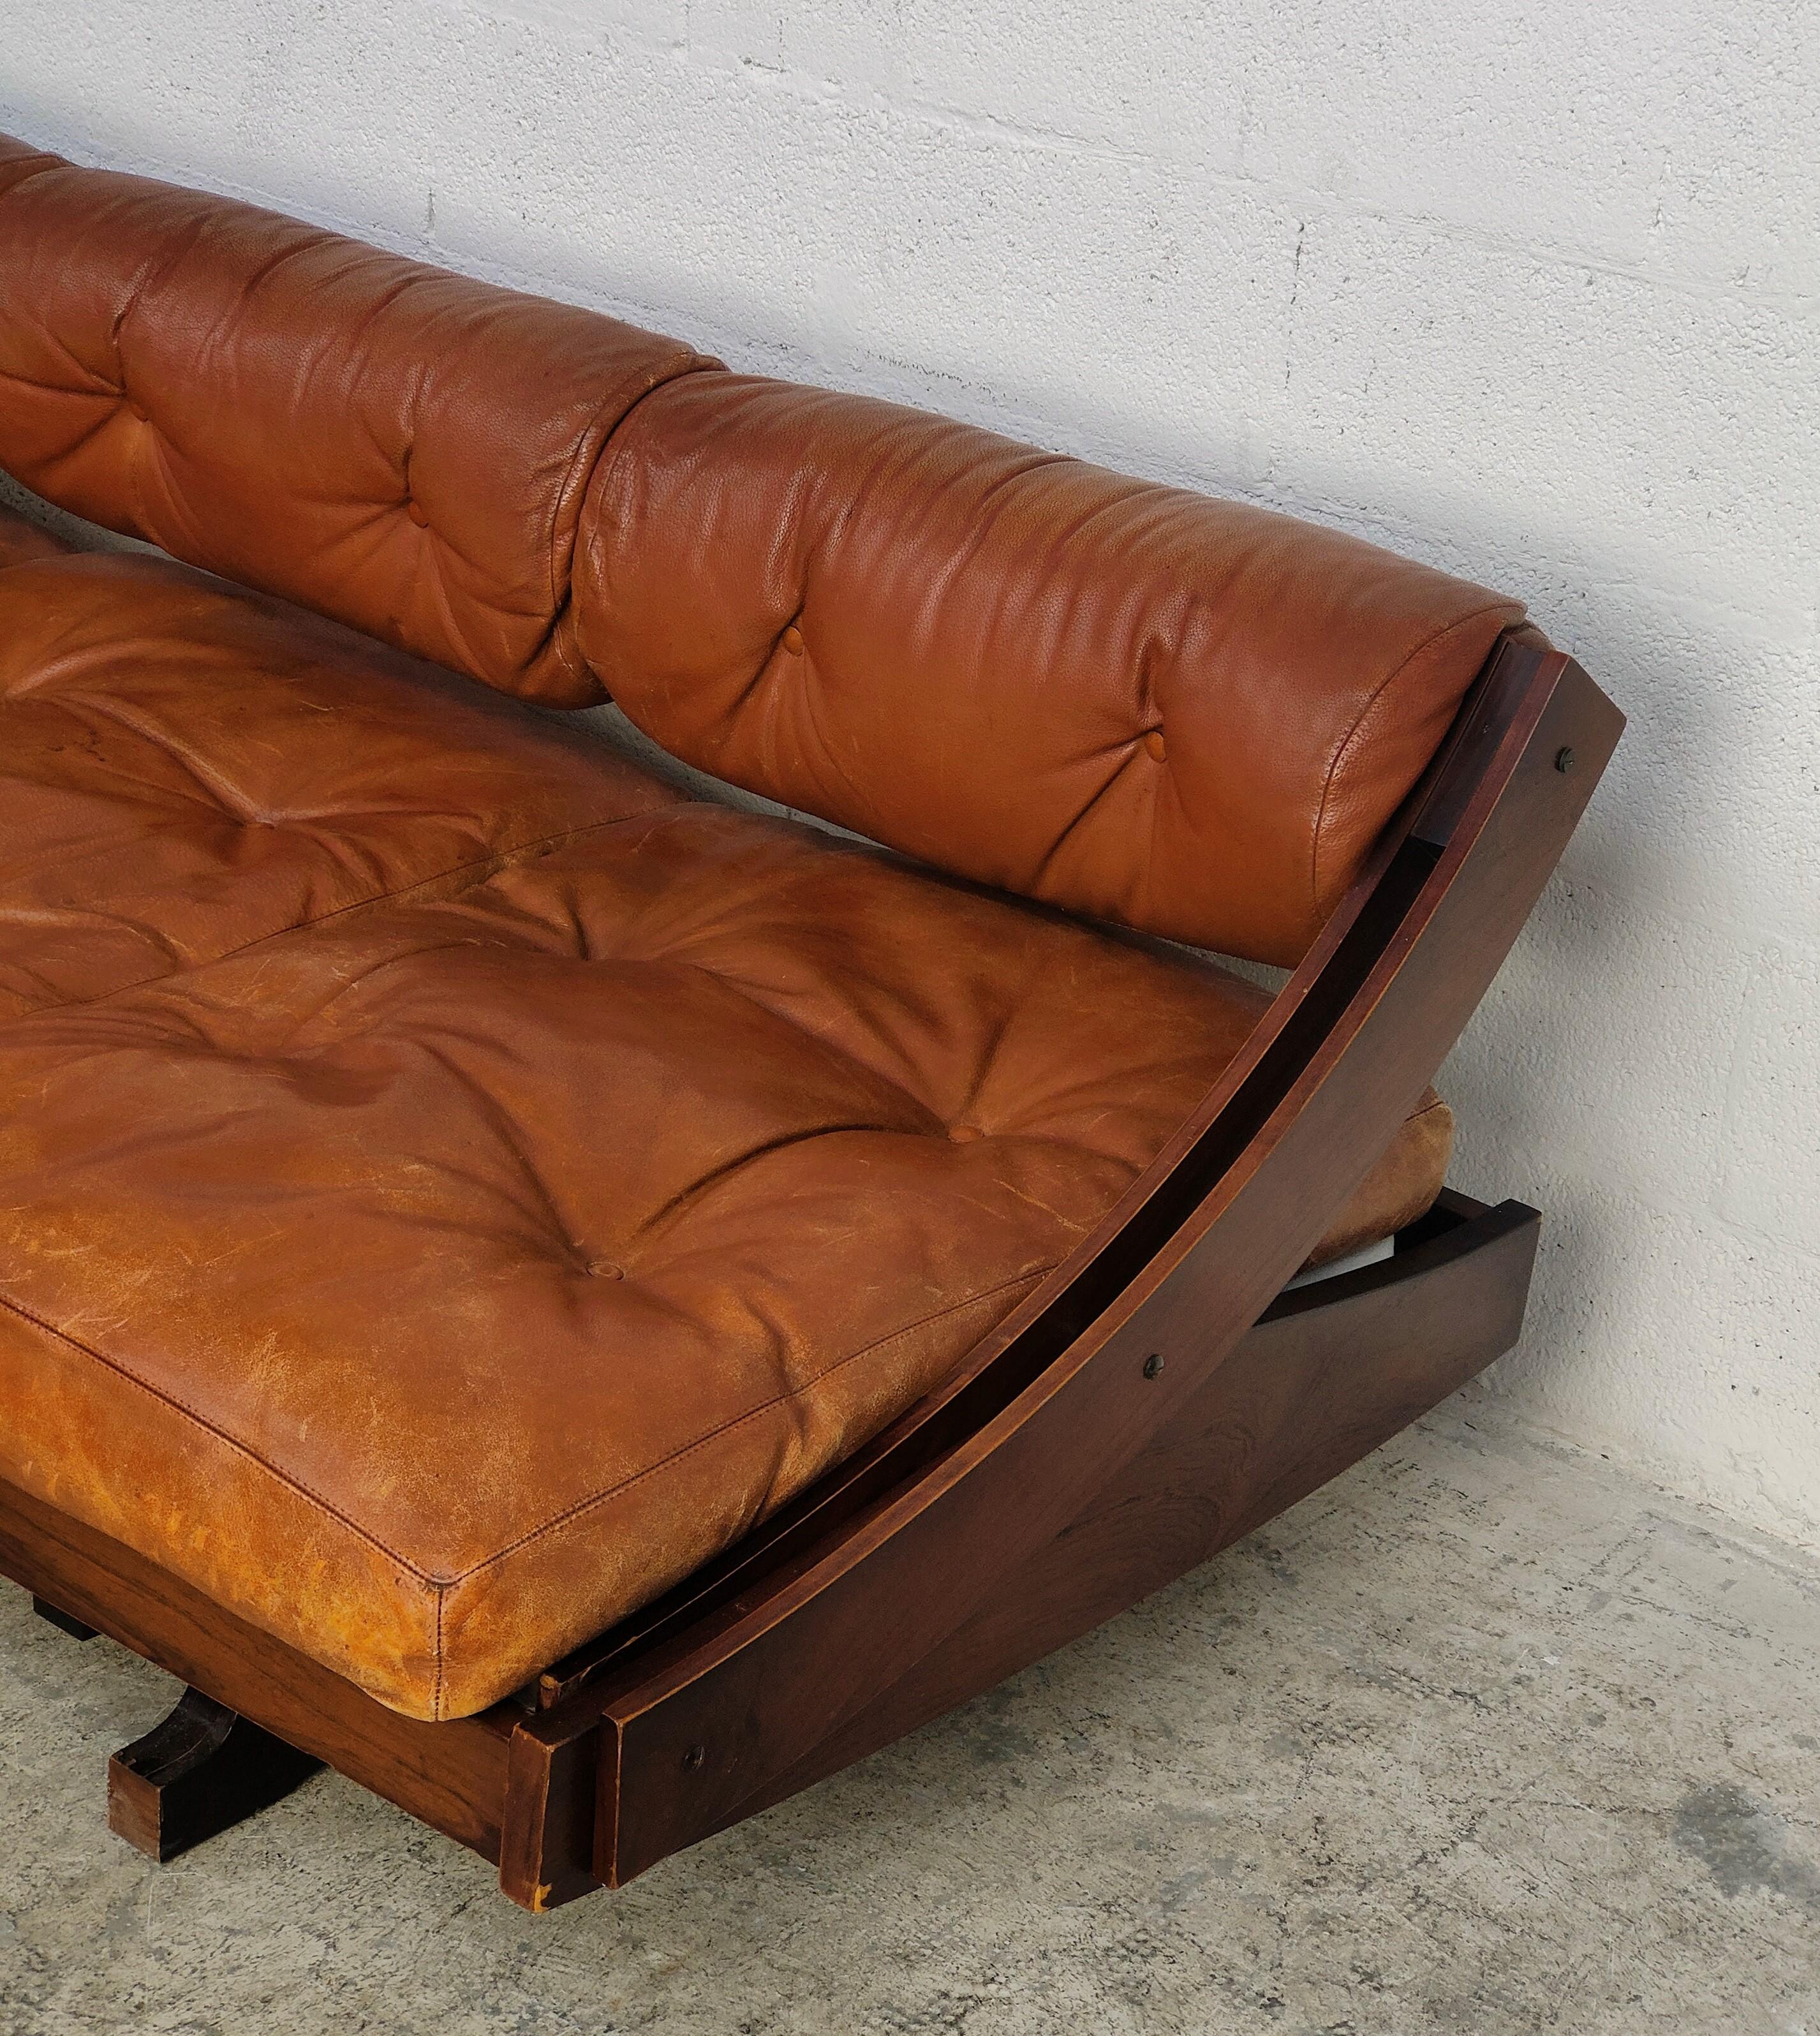 Mid-Century Modern Leather Daybed Sofa GS 195 by Gianni Songia for Sormani 60s